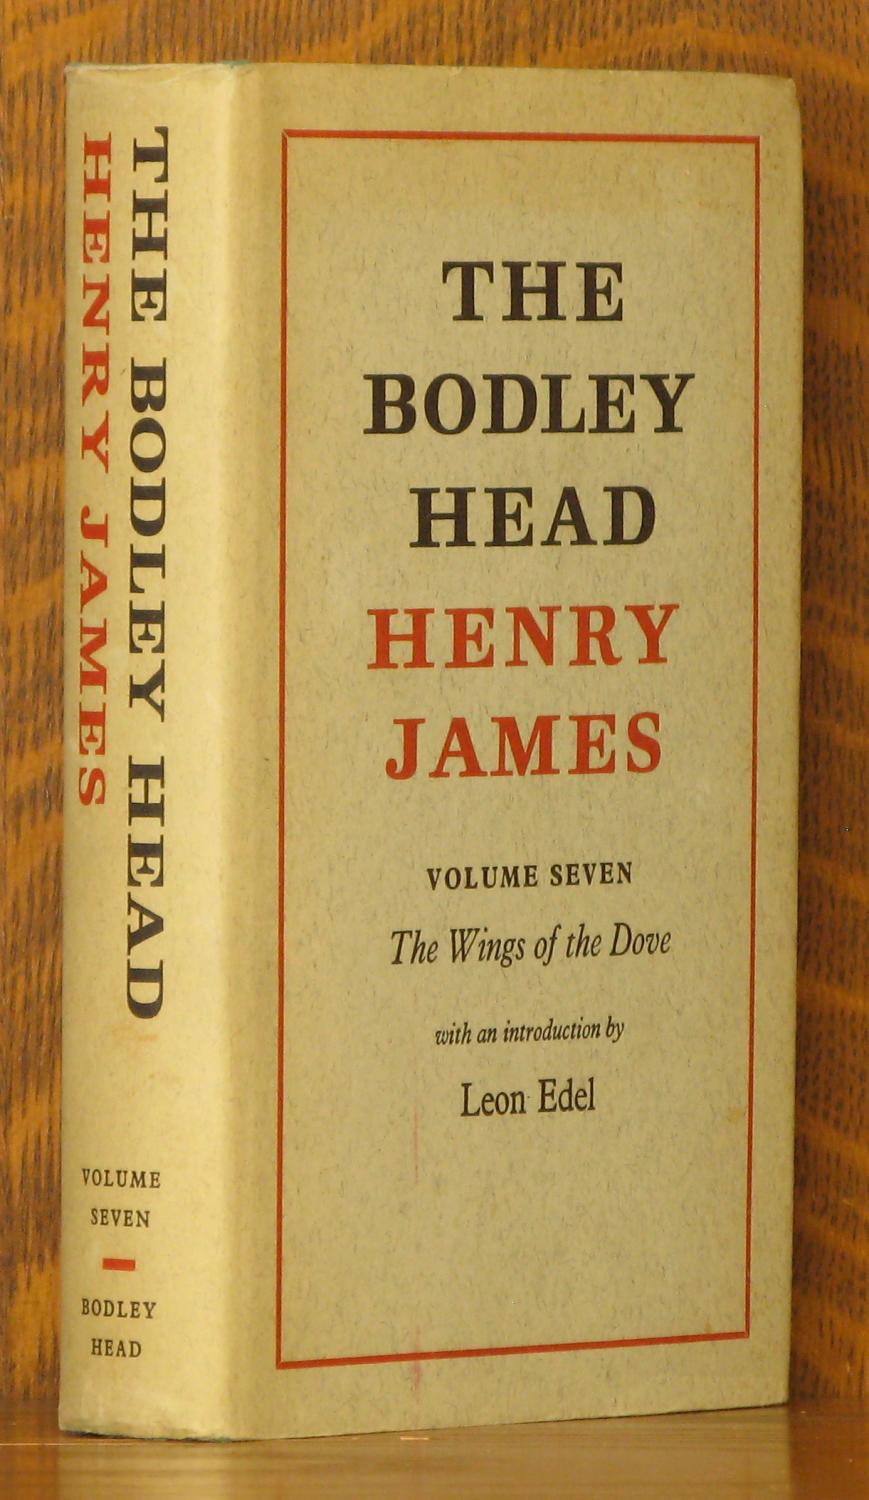 THE WINGS OF THE DOVE (vol. 7 of the bodley head henry james) - Henry James